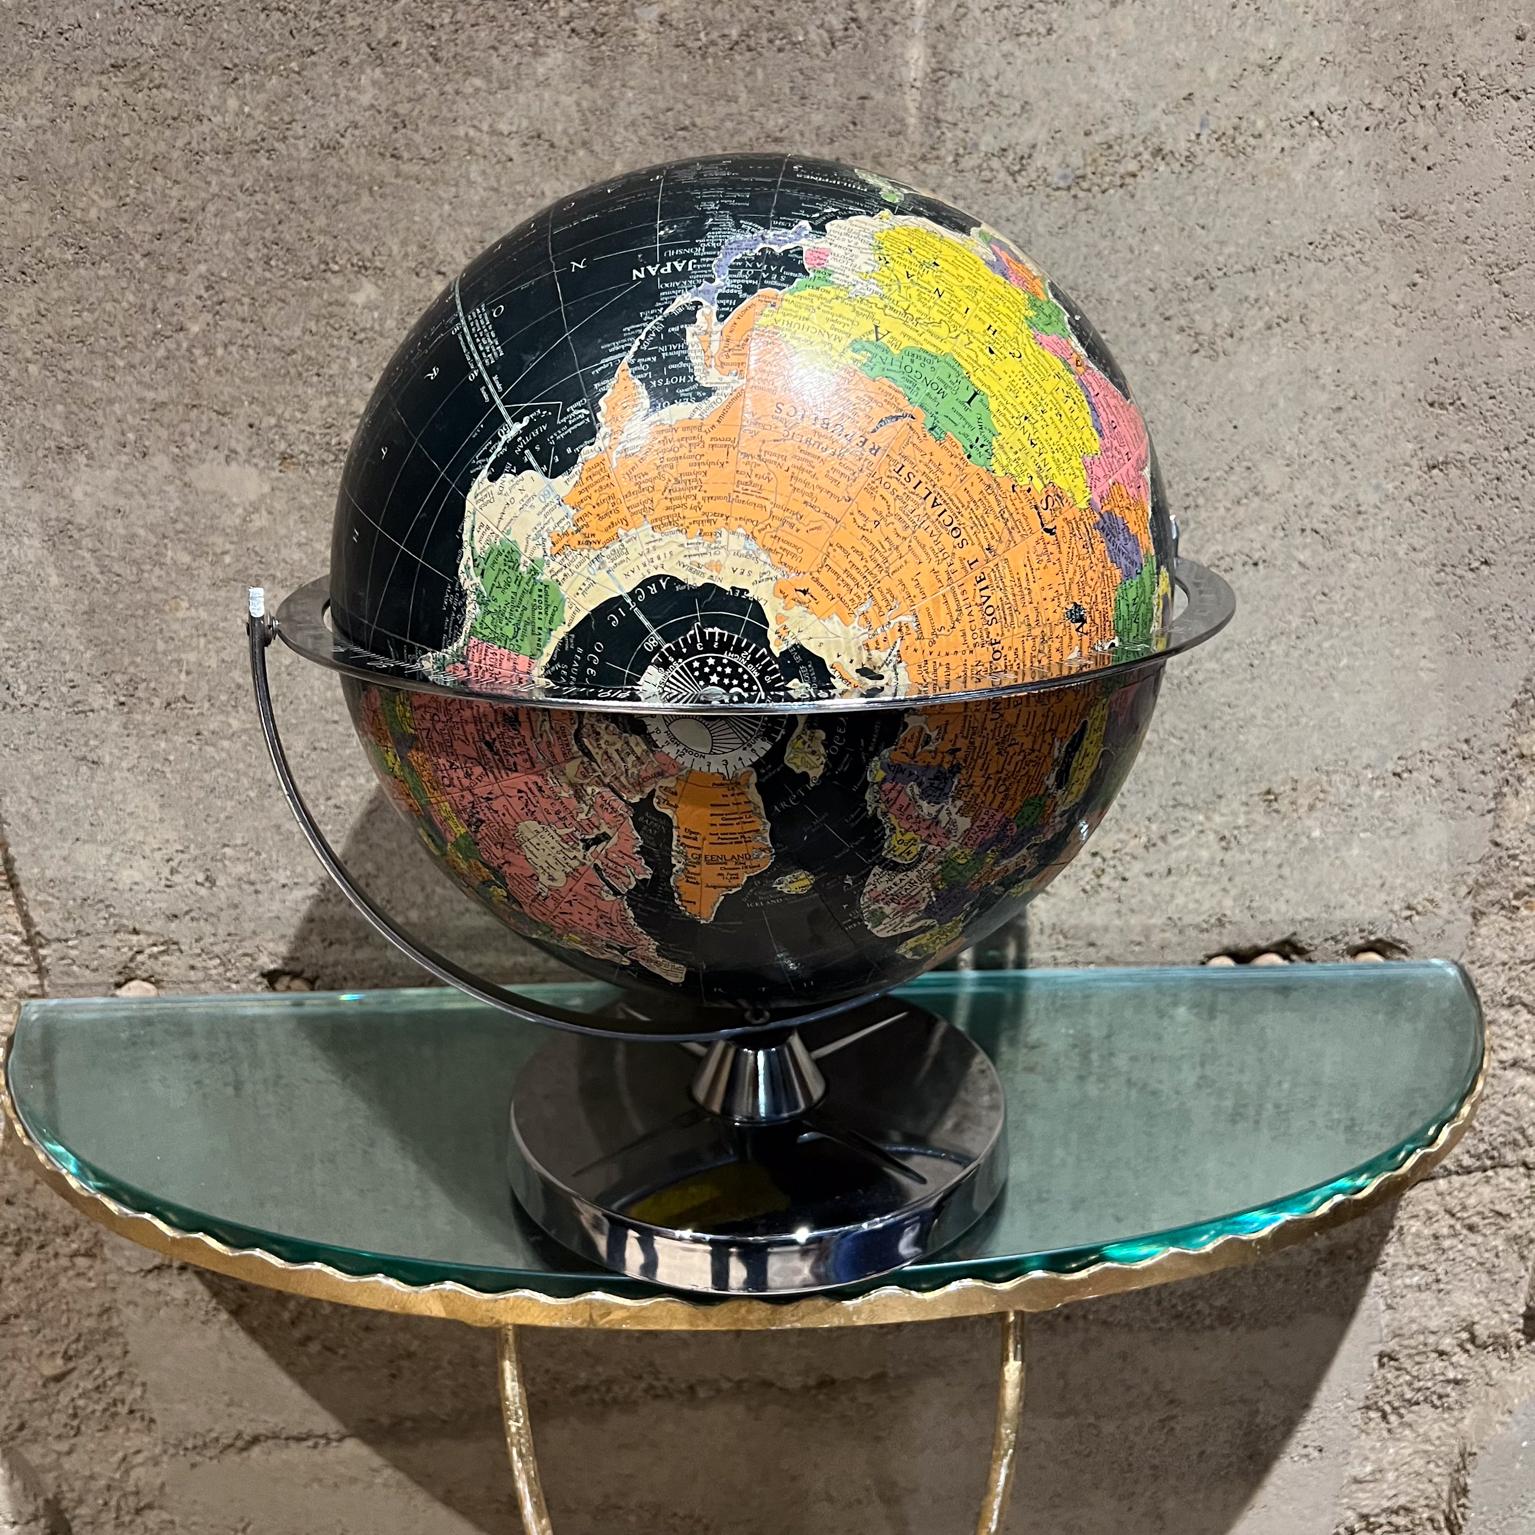 1960s Vintage Replogle Black Ocean World Globe
12 inch starlight globe
made in Chicago
maker stamp
15 h x 13 diameter
Stunning decorative collectible chrome and steel
Preowned original unrestored vintage condition
Refer to images.